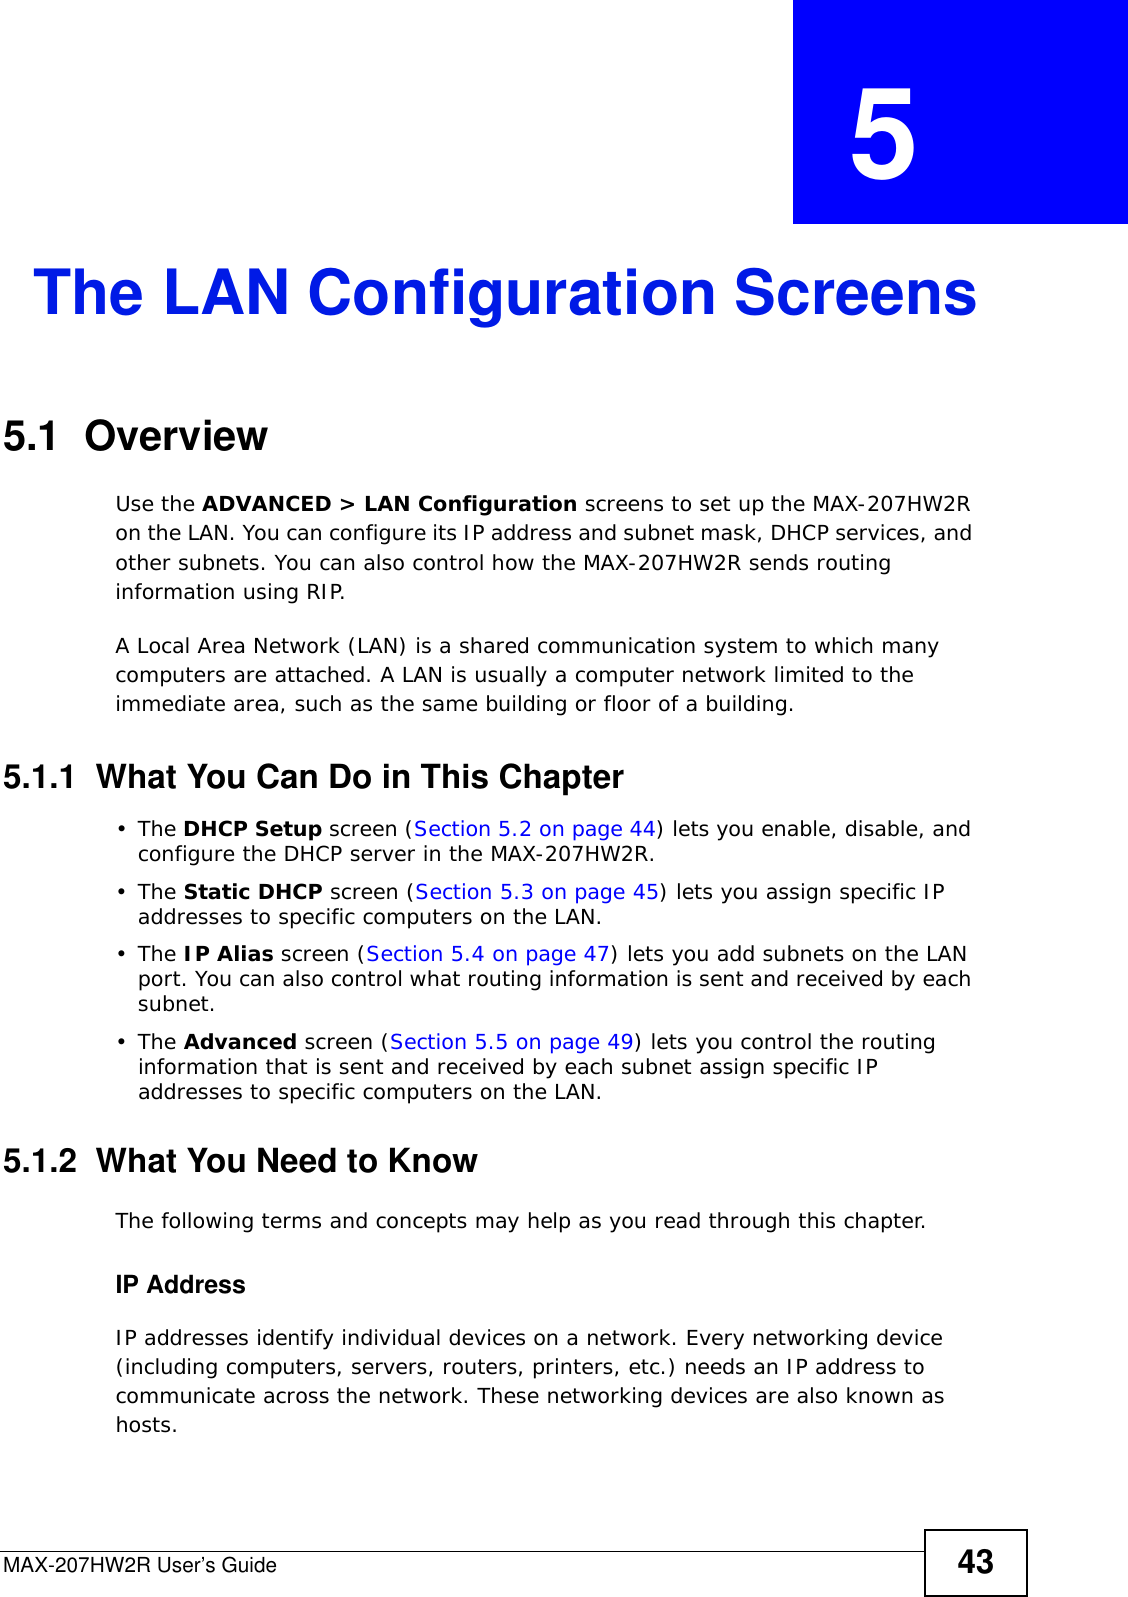 MAX-207HW2R User’s Guide 43CHAPTER  5 The LAN Configuration Screens5.1  OverviewUse the ADVANCED &gt; LAN Configuration screens to set up the MAX-207HW2R on the LAN. You can configure its IP address and subnet mask, DHCP services, and other subnets. You can also control how the MAX-207HW2R sends routing information using RIP.A Local Area Network (LAN) is a shared communication system to which many computers are attached. A LAN is usually a computer network limited to the immediate area, such as the same building or floor of a building.5.1.1  What You Can Do in This Chapter•The DHCP Setup screen (Section 5.2 on page 44) lets you enable, disable, and configure the DHCP server in the MAX-207HW2R.•The Static DHCP screen (Section 5.3 on page 45) lets you assign specific IP addresses to specific computers on the LAN.•The IP Alias screen (Section 5.4 on page 47) lets you add subnets on the LAN port. You can also control what routing information is sent and received by each subnet.•The Advanced screen (Section 5.5 on page 49) lets you control the routing information that is sent and received by each subnet assign specific IP addresses to specific computers on the LAN.5.1.2  What You Need to KnowThe following terms and concepts may help as you read through this chapter.IP AddressIP addresses identify individual devices on a network. Every networking device (including computers, servers, routers, printers, etc.) needs an IP address to communicate across the network. These networking devices are also known as hosts.